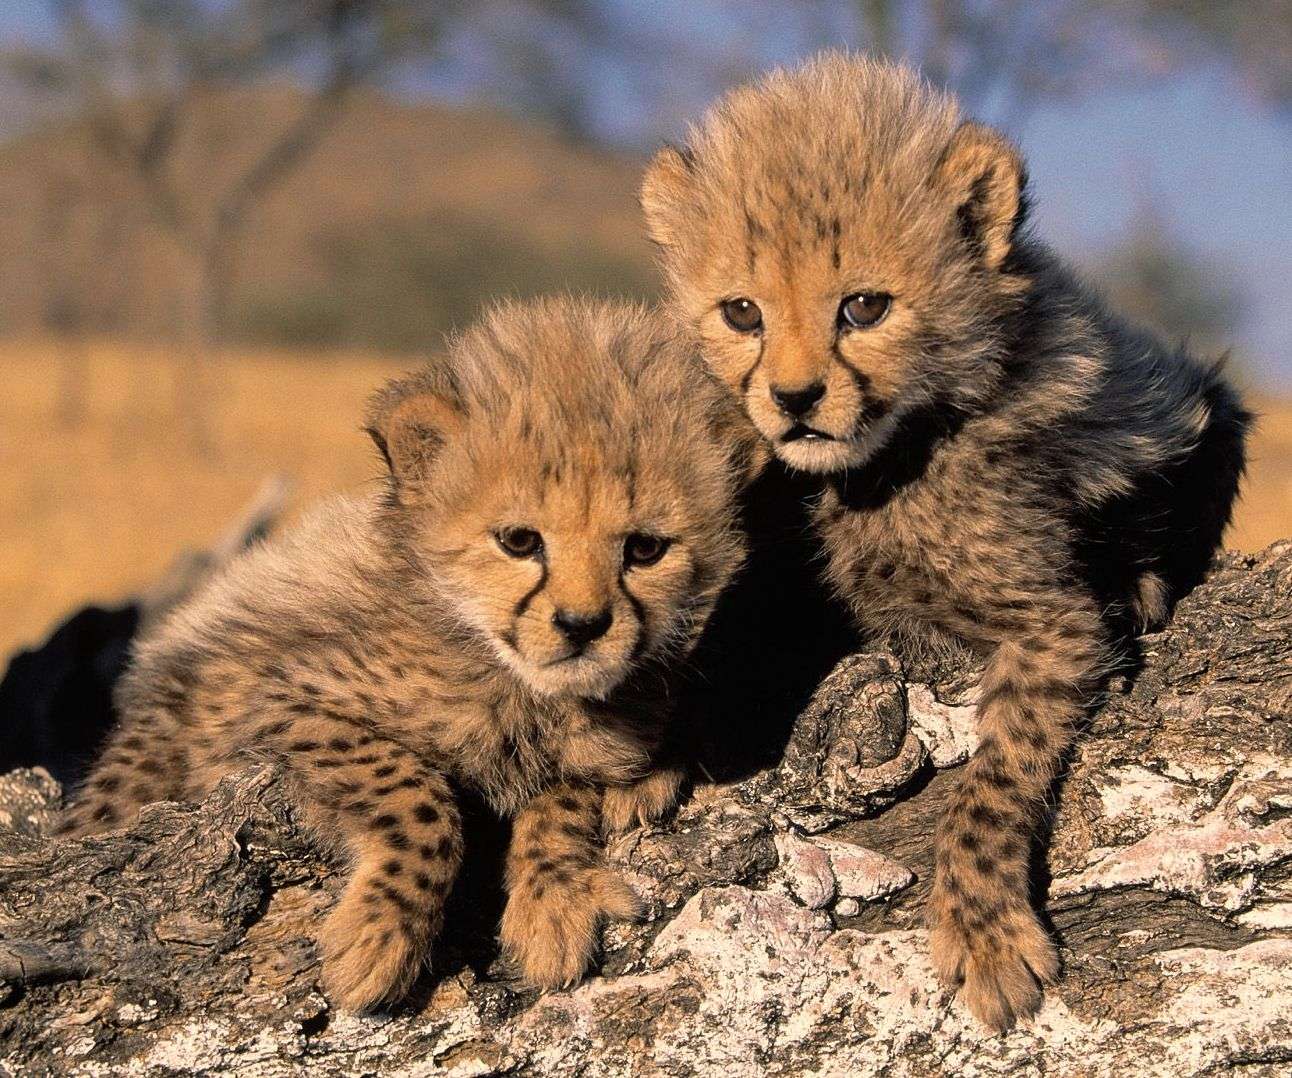 Baby Cheetahs puzzle online from photo